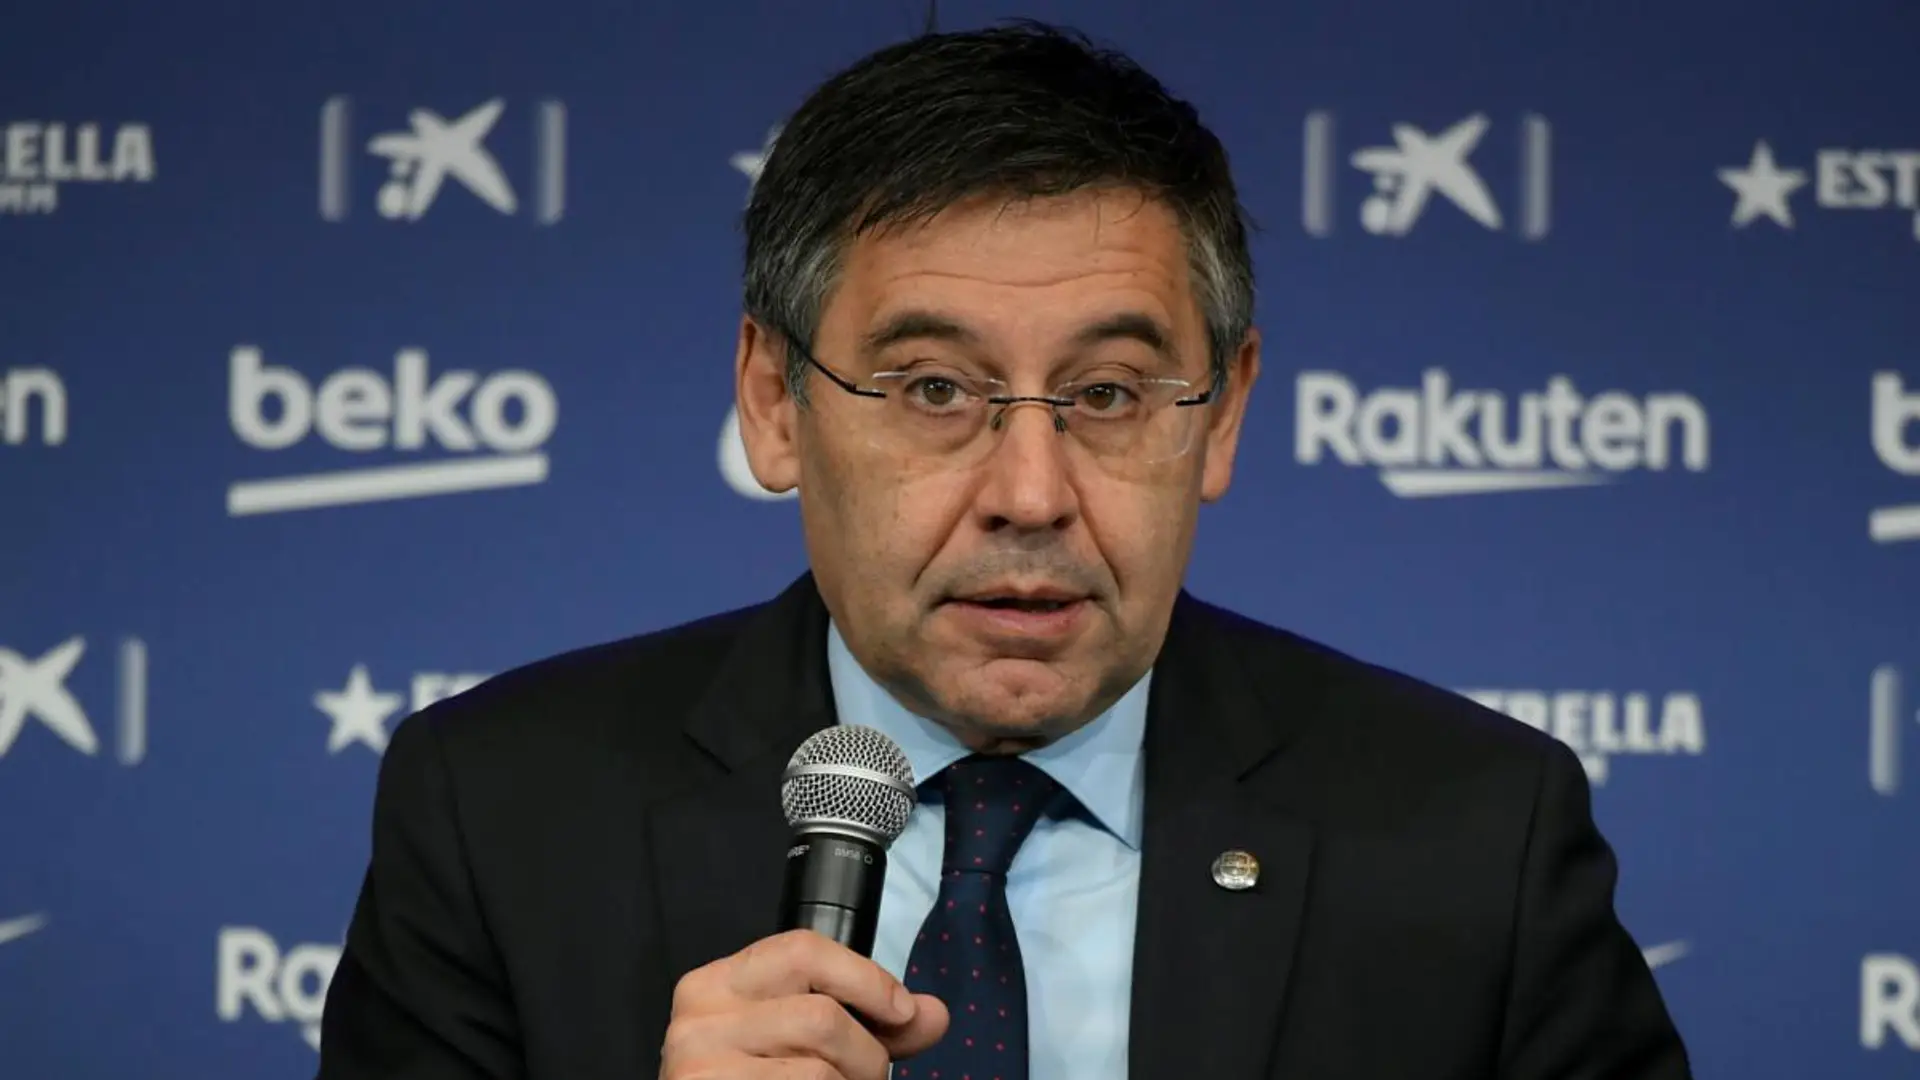 What if Bartomeu out? What can next president bring?